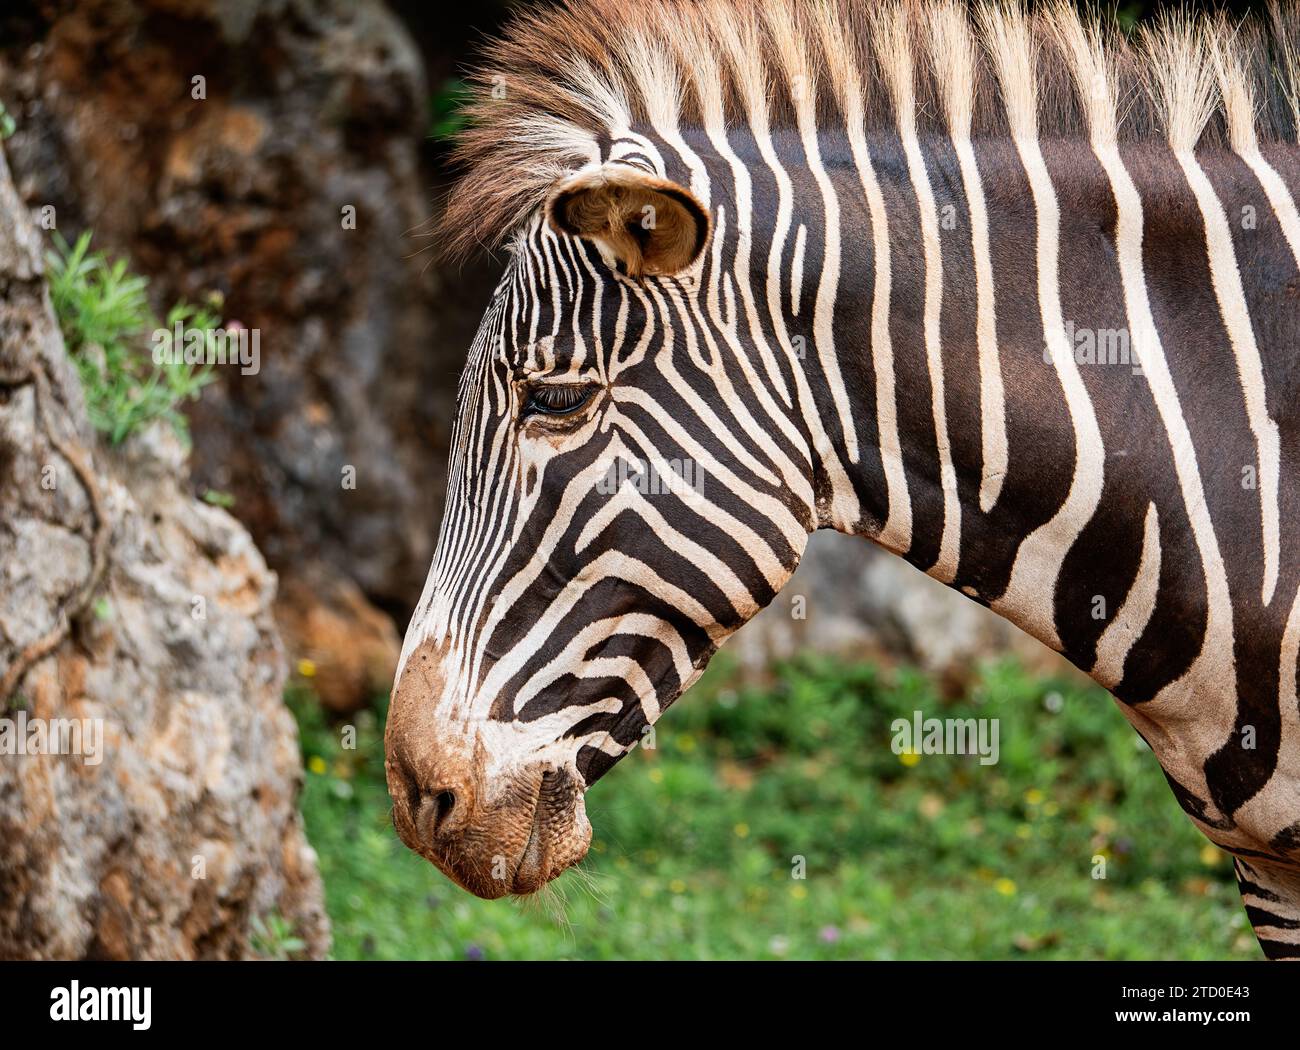 A detailed close-up shot captures the unique patterns and texture of a common zebra's face set against a soft, natural backdrop with rocks and foliage Stock Photo